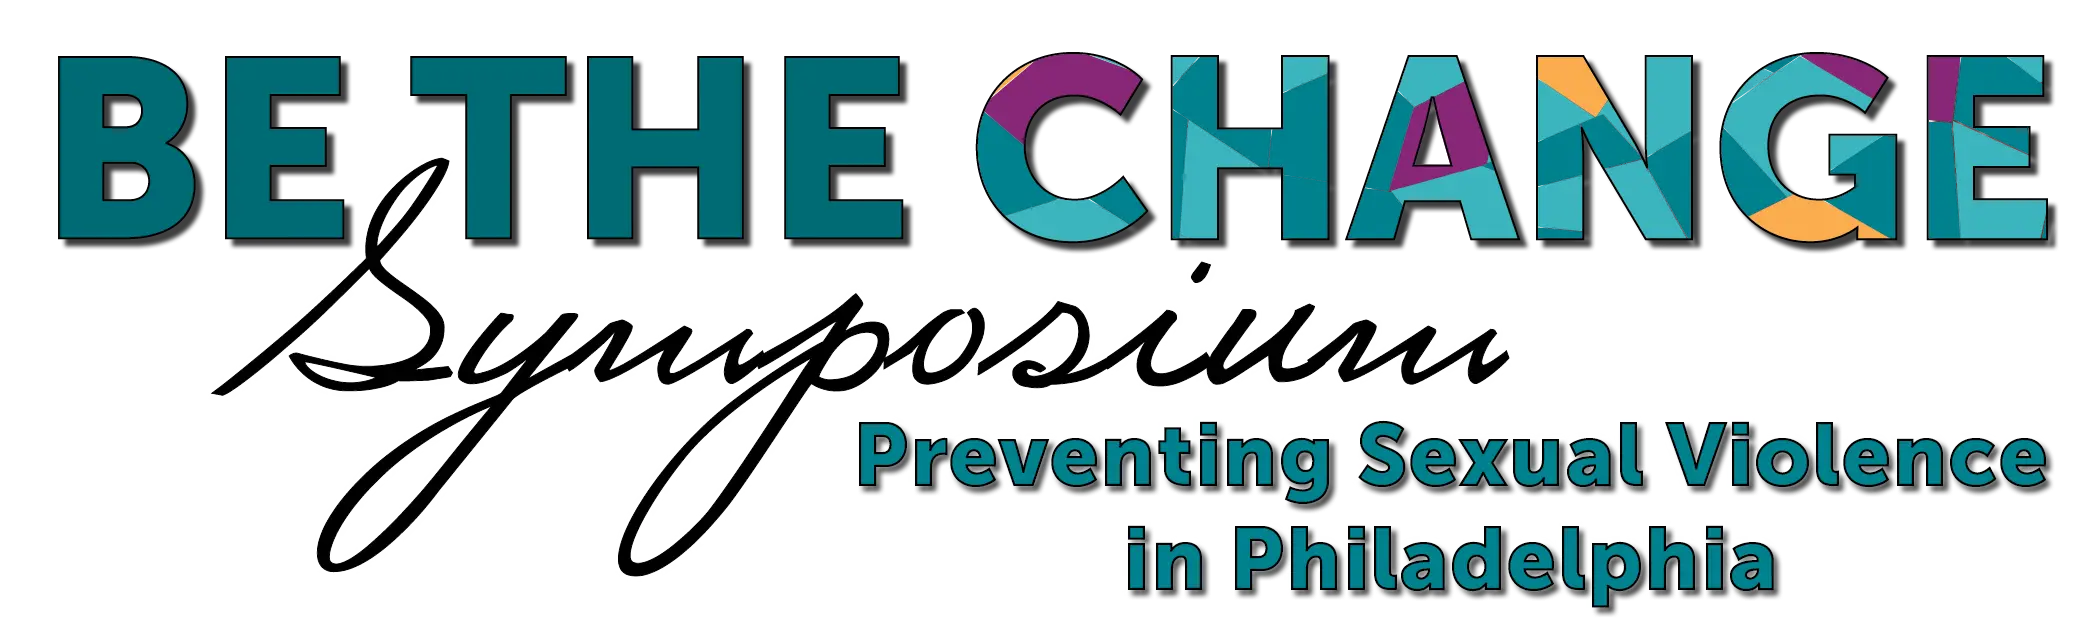 Be the Change Symposium - Preventing Sexual Violence in Philadelphia